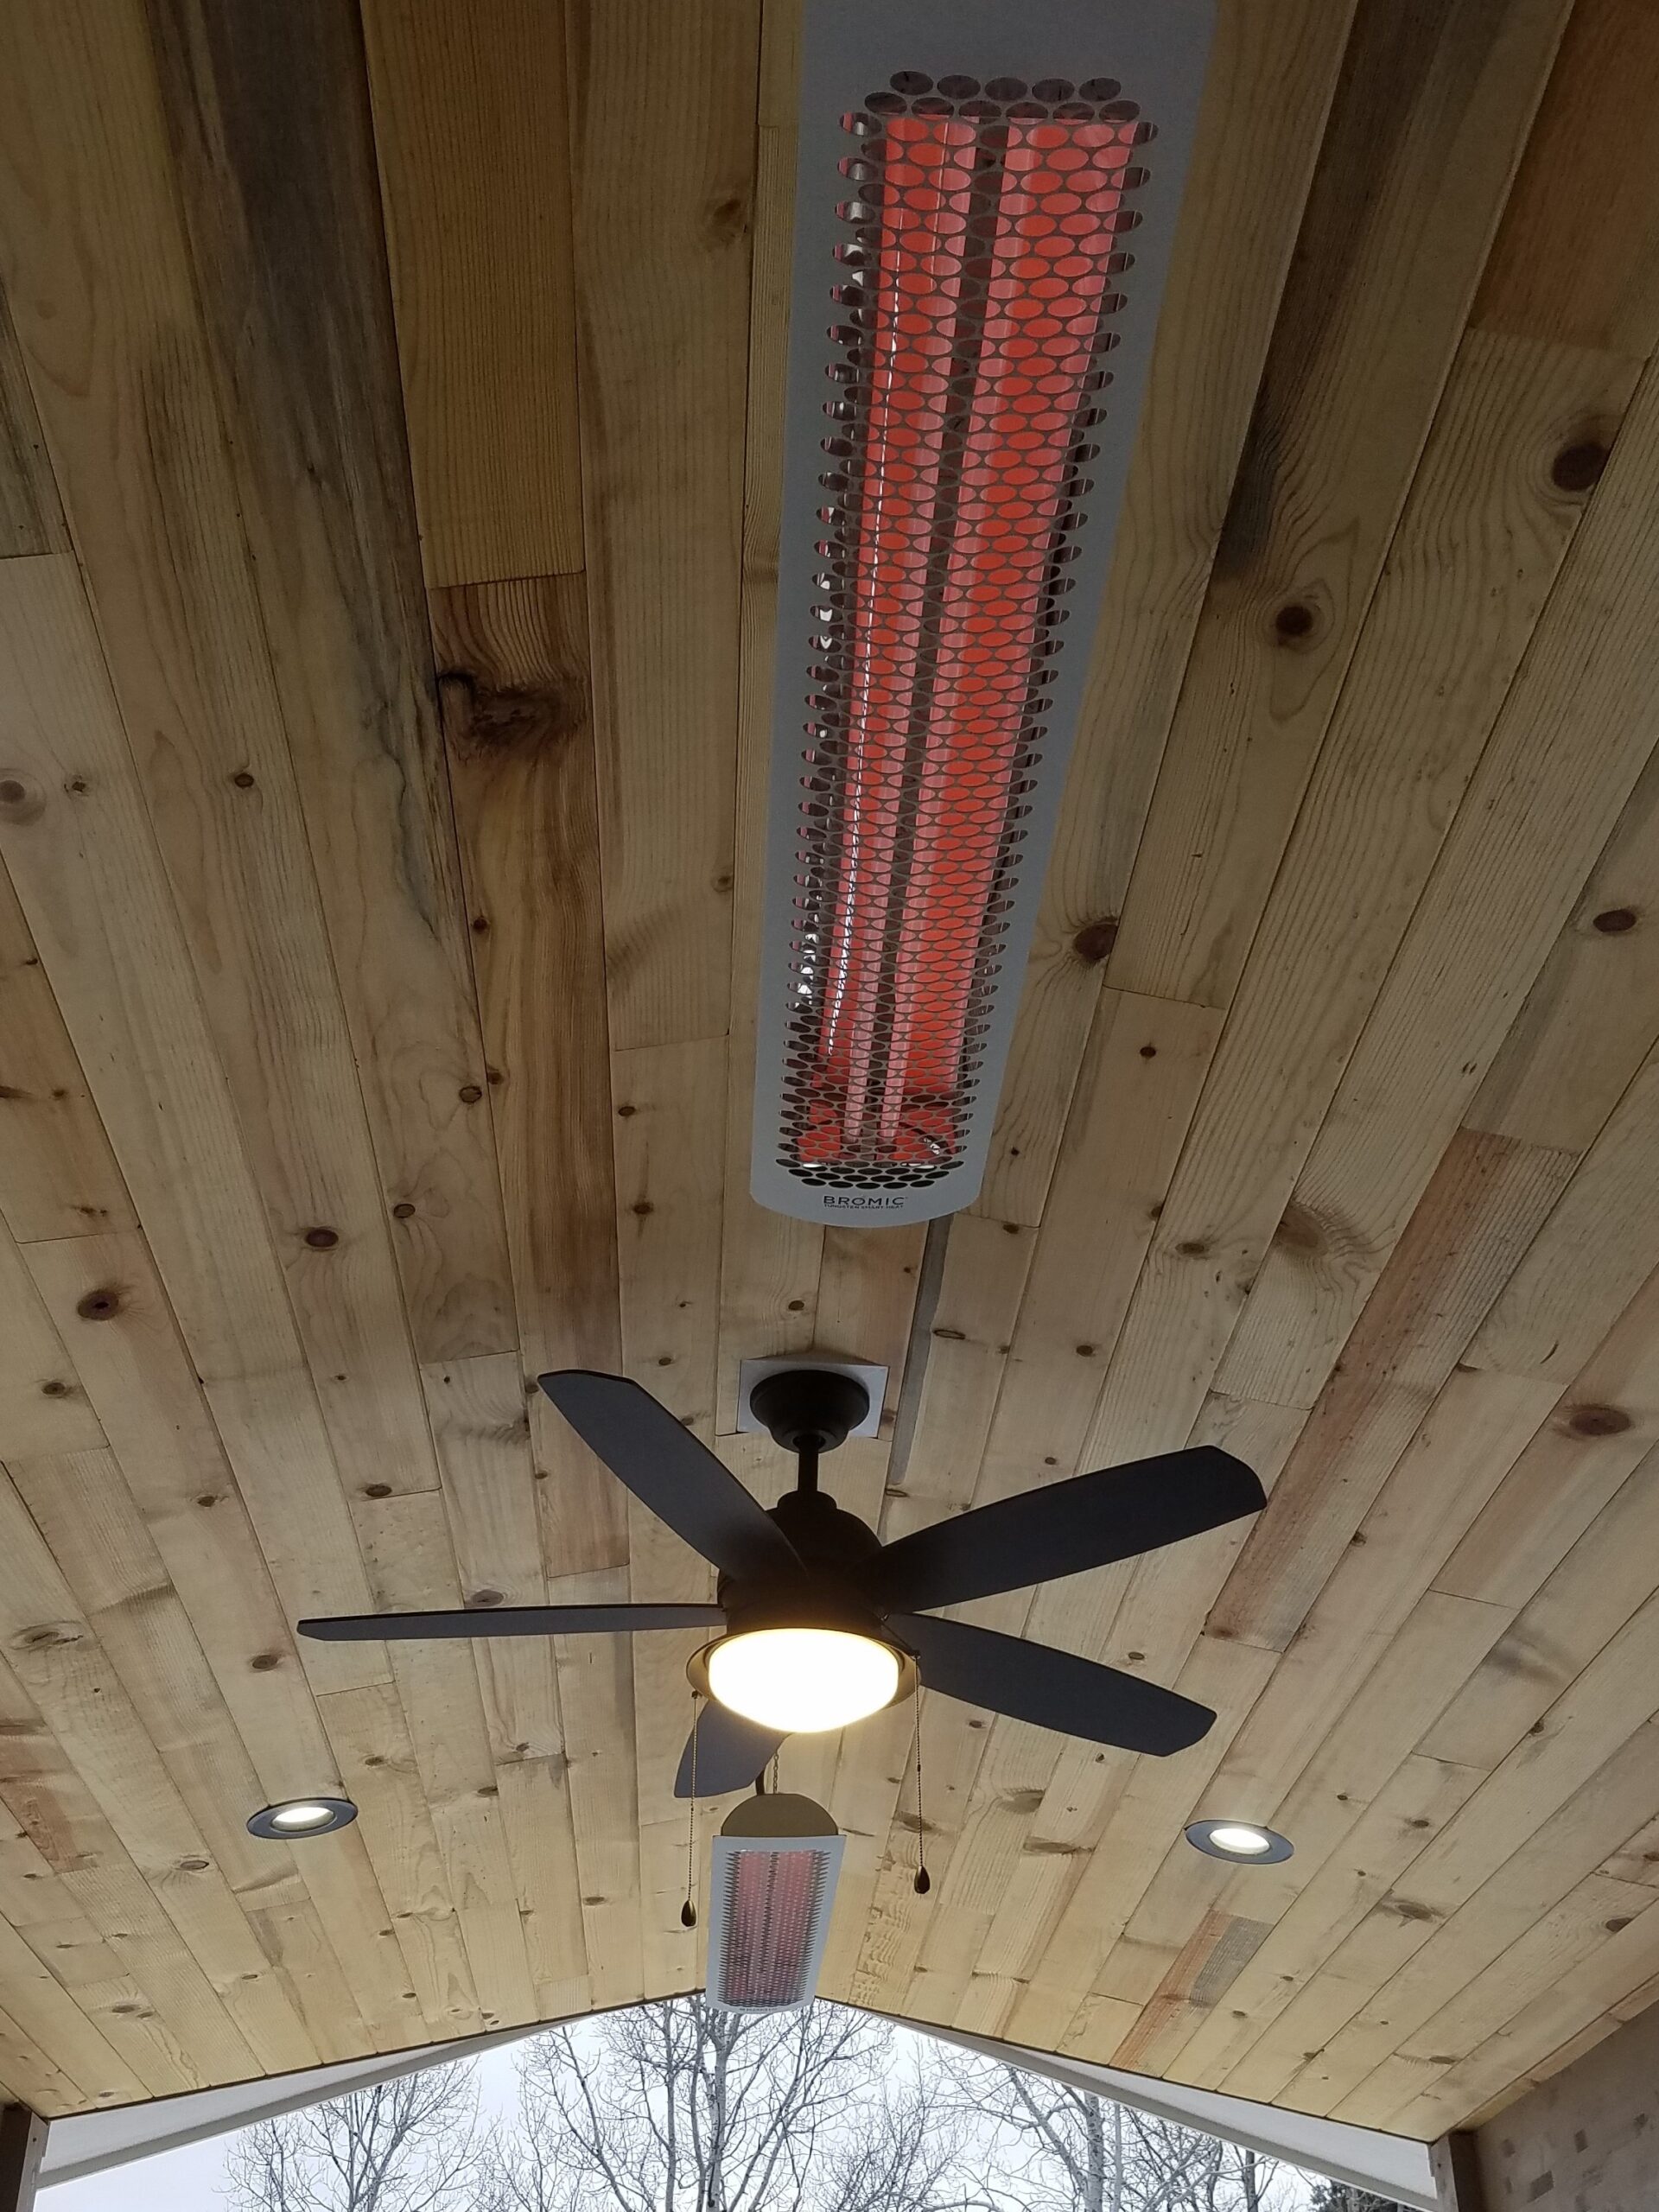 Deck cover with a vaulted ceiling in Blue Stain pine. It also includes recessed lights, a ceiling fan, and two overhead heaters.